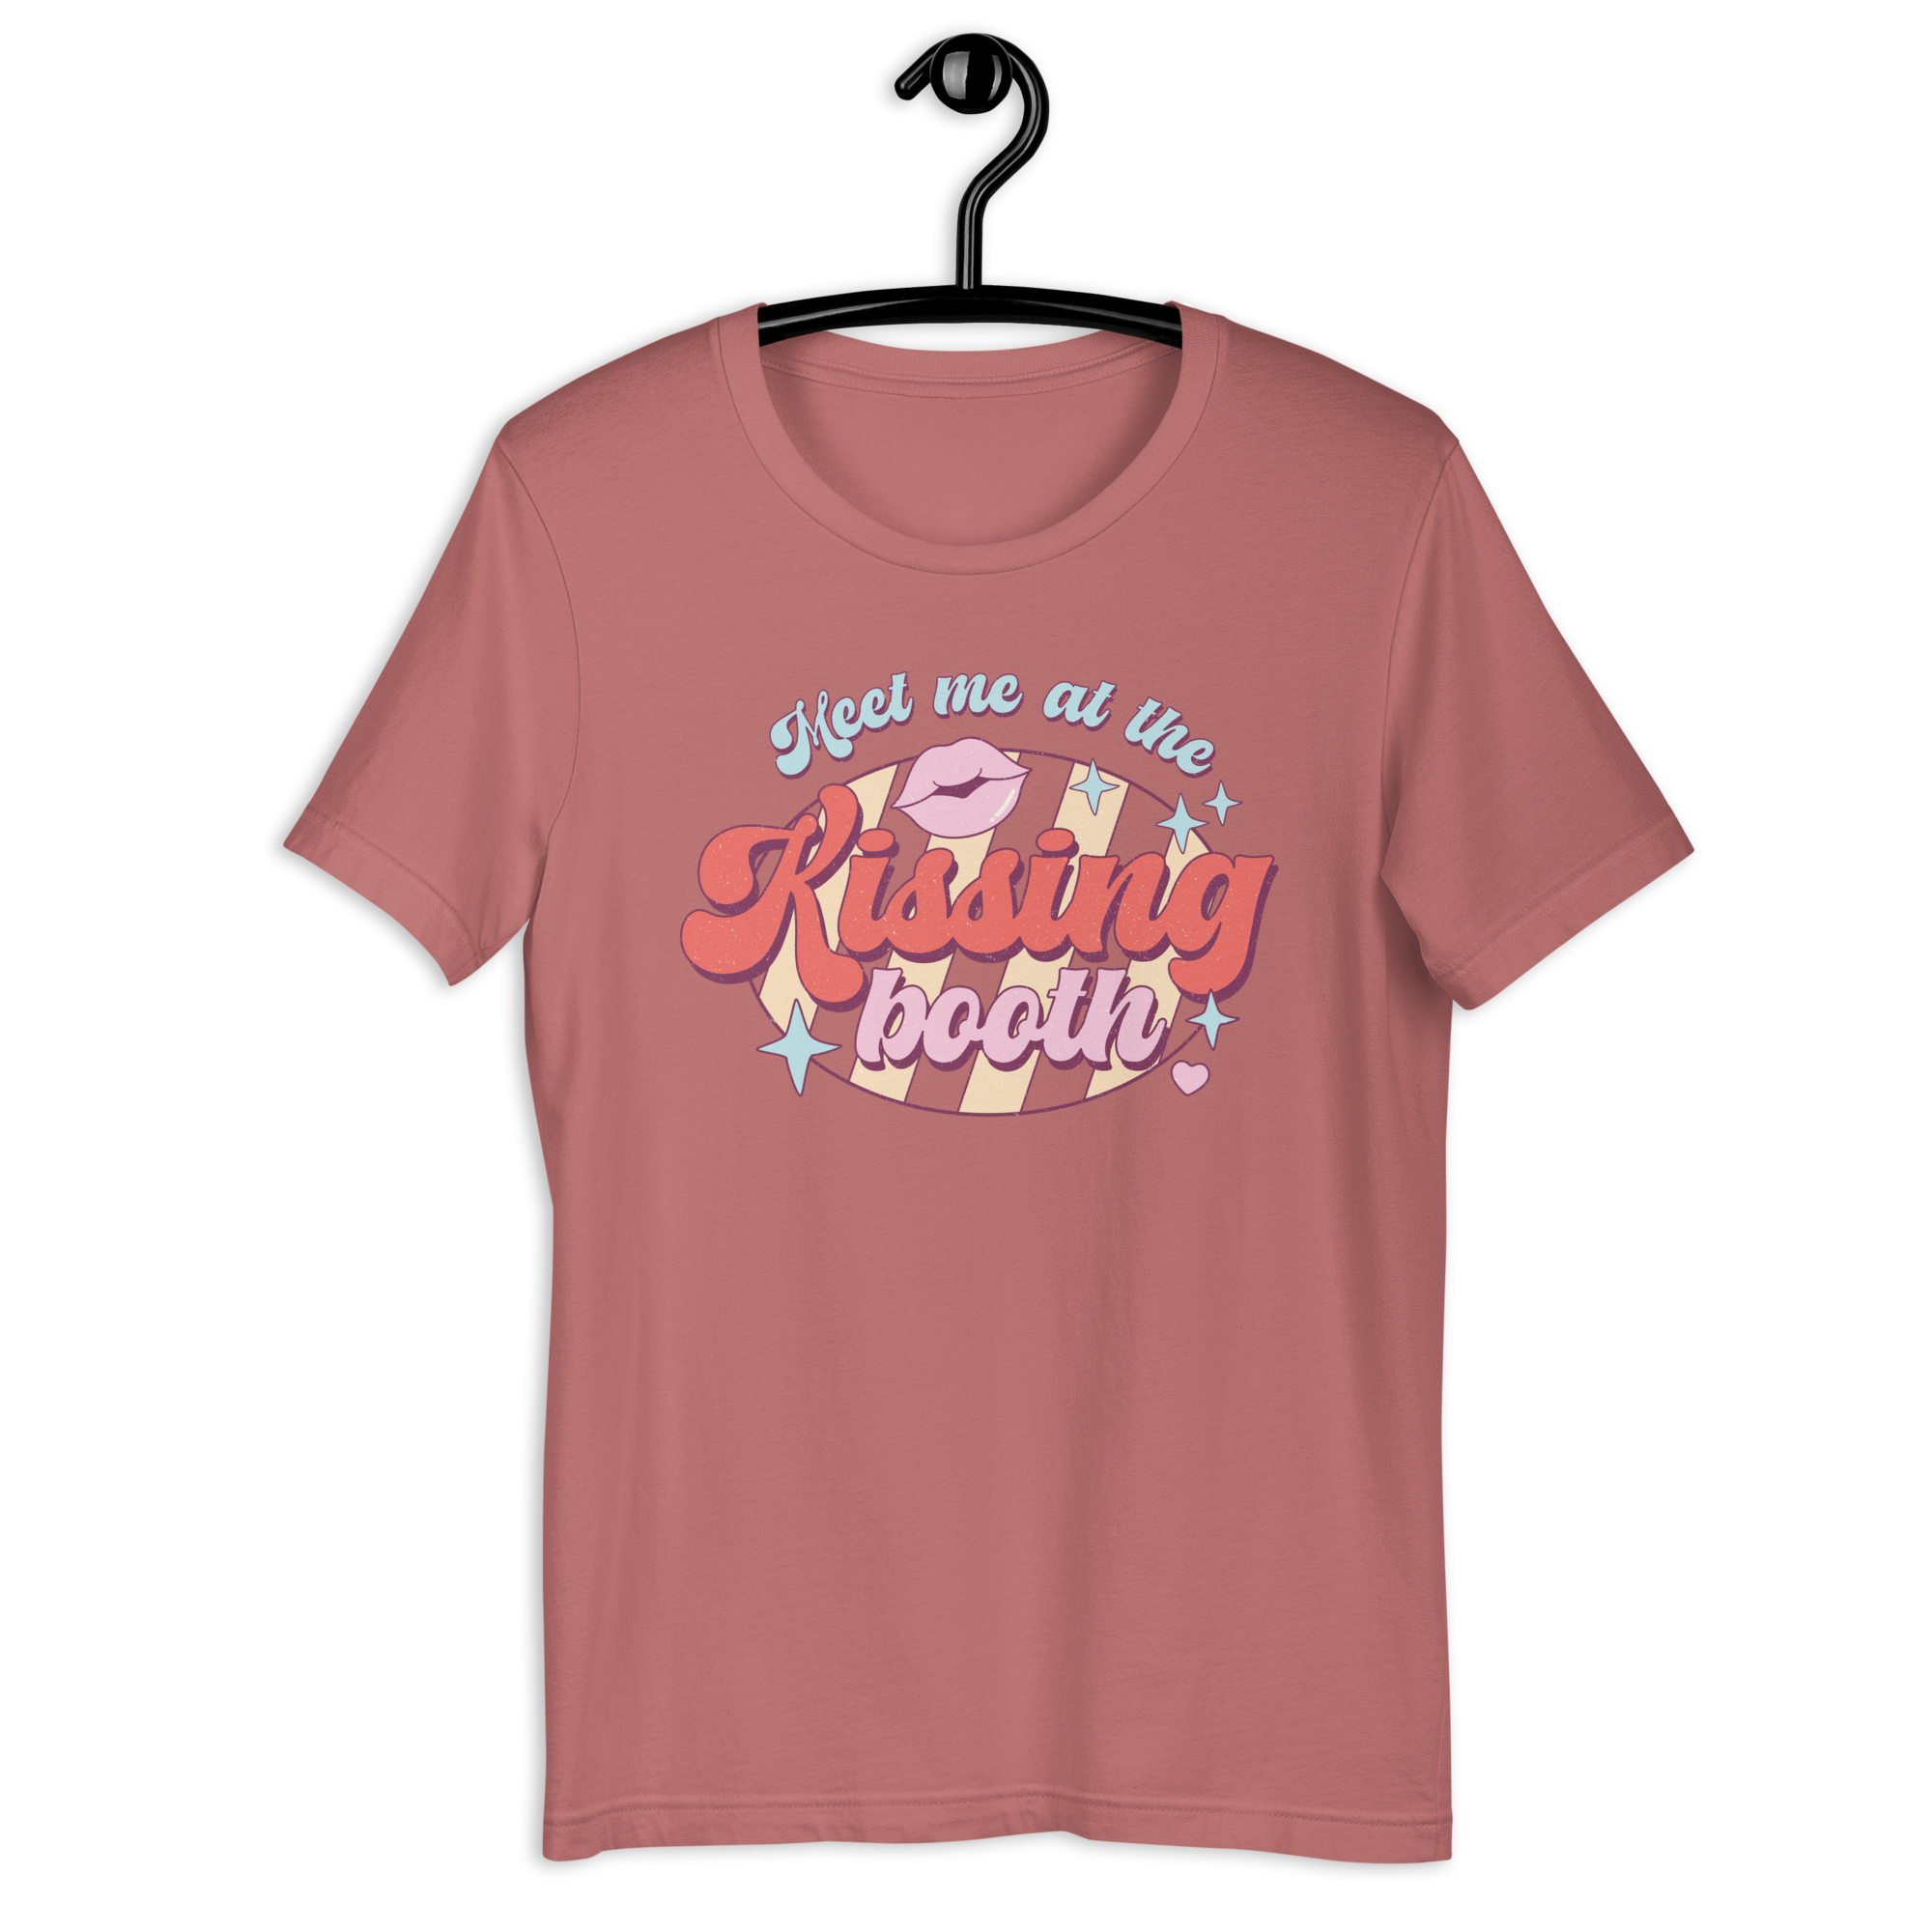 Kissing Booth Tee